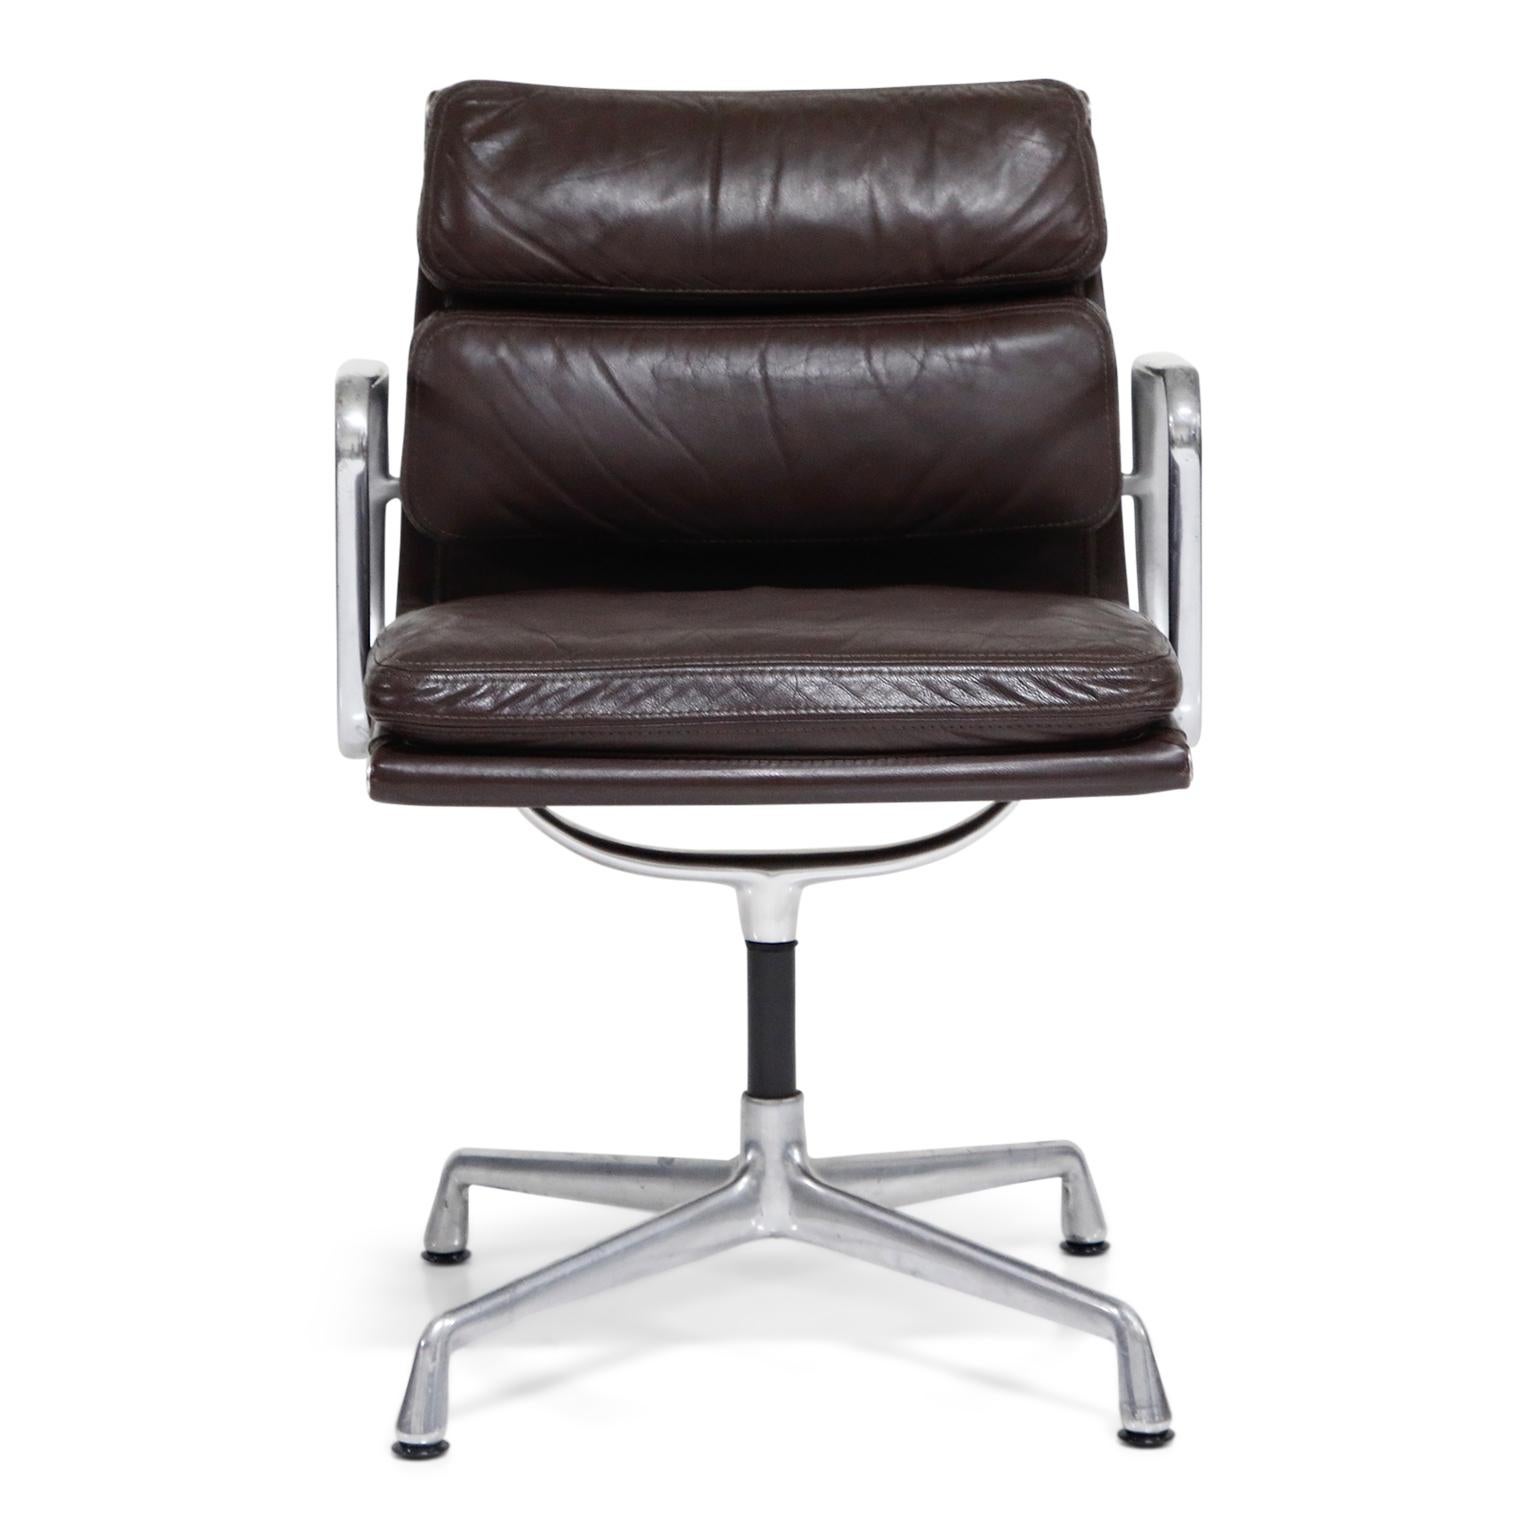 A collectible and sought after set of four (4) leather 'Soft Pad' Management chairs from the Aluminum Group line, designed by Charles and Ray Eames for Herman Miller. Featuring its original vintage Auburgine color leather which possesses a beautiful